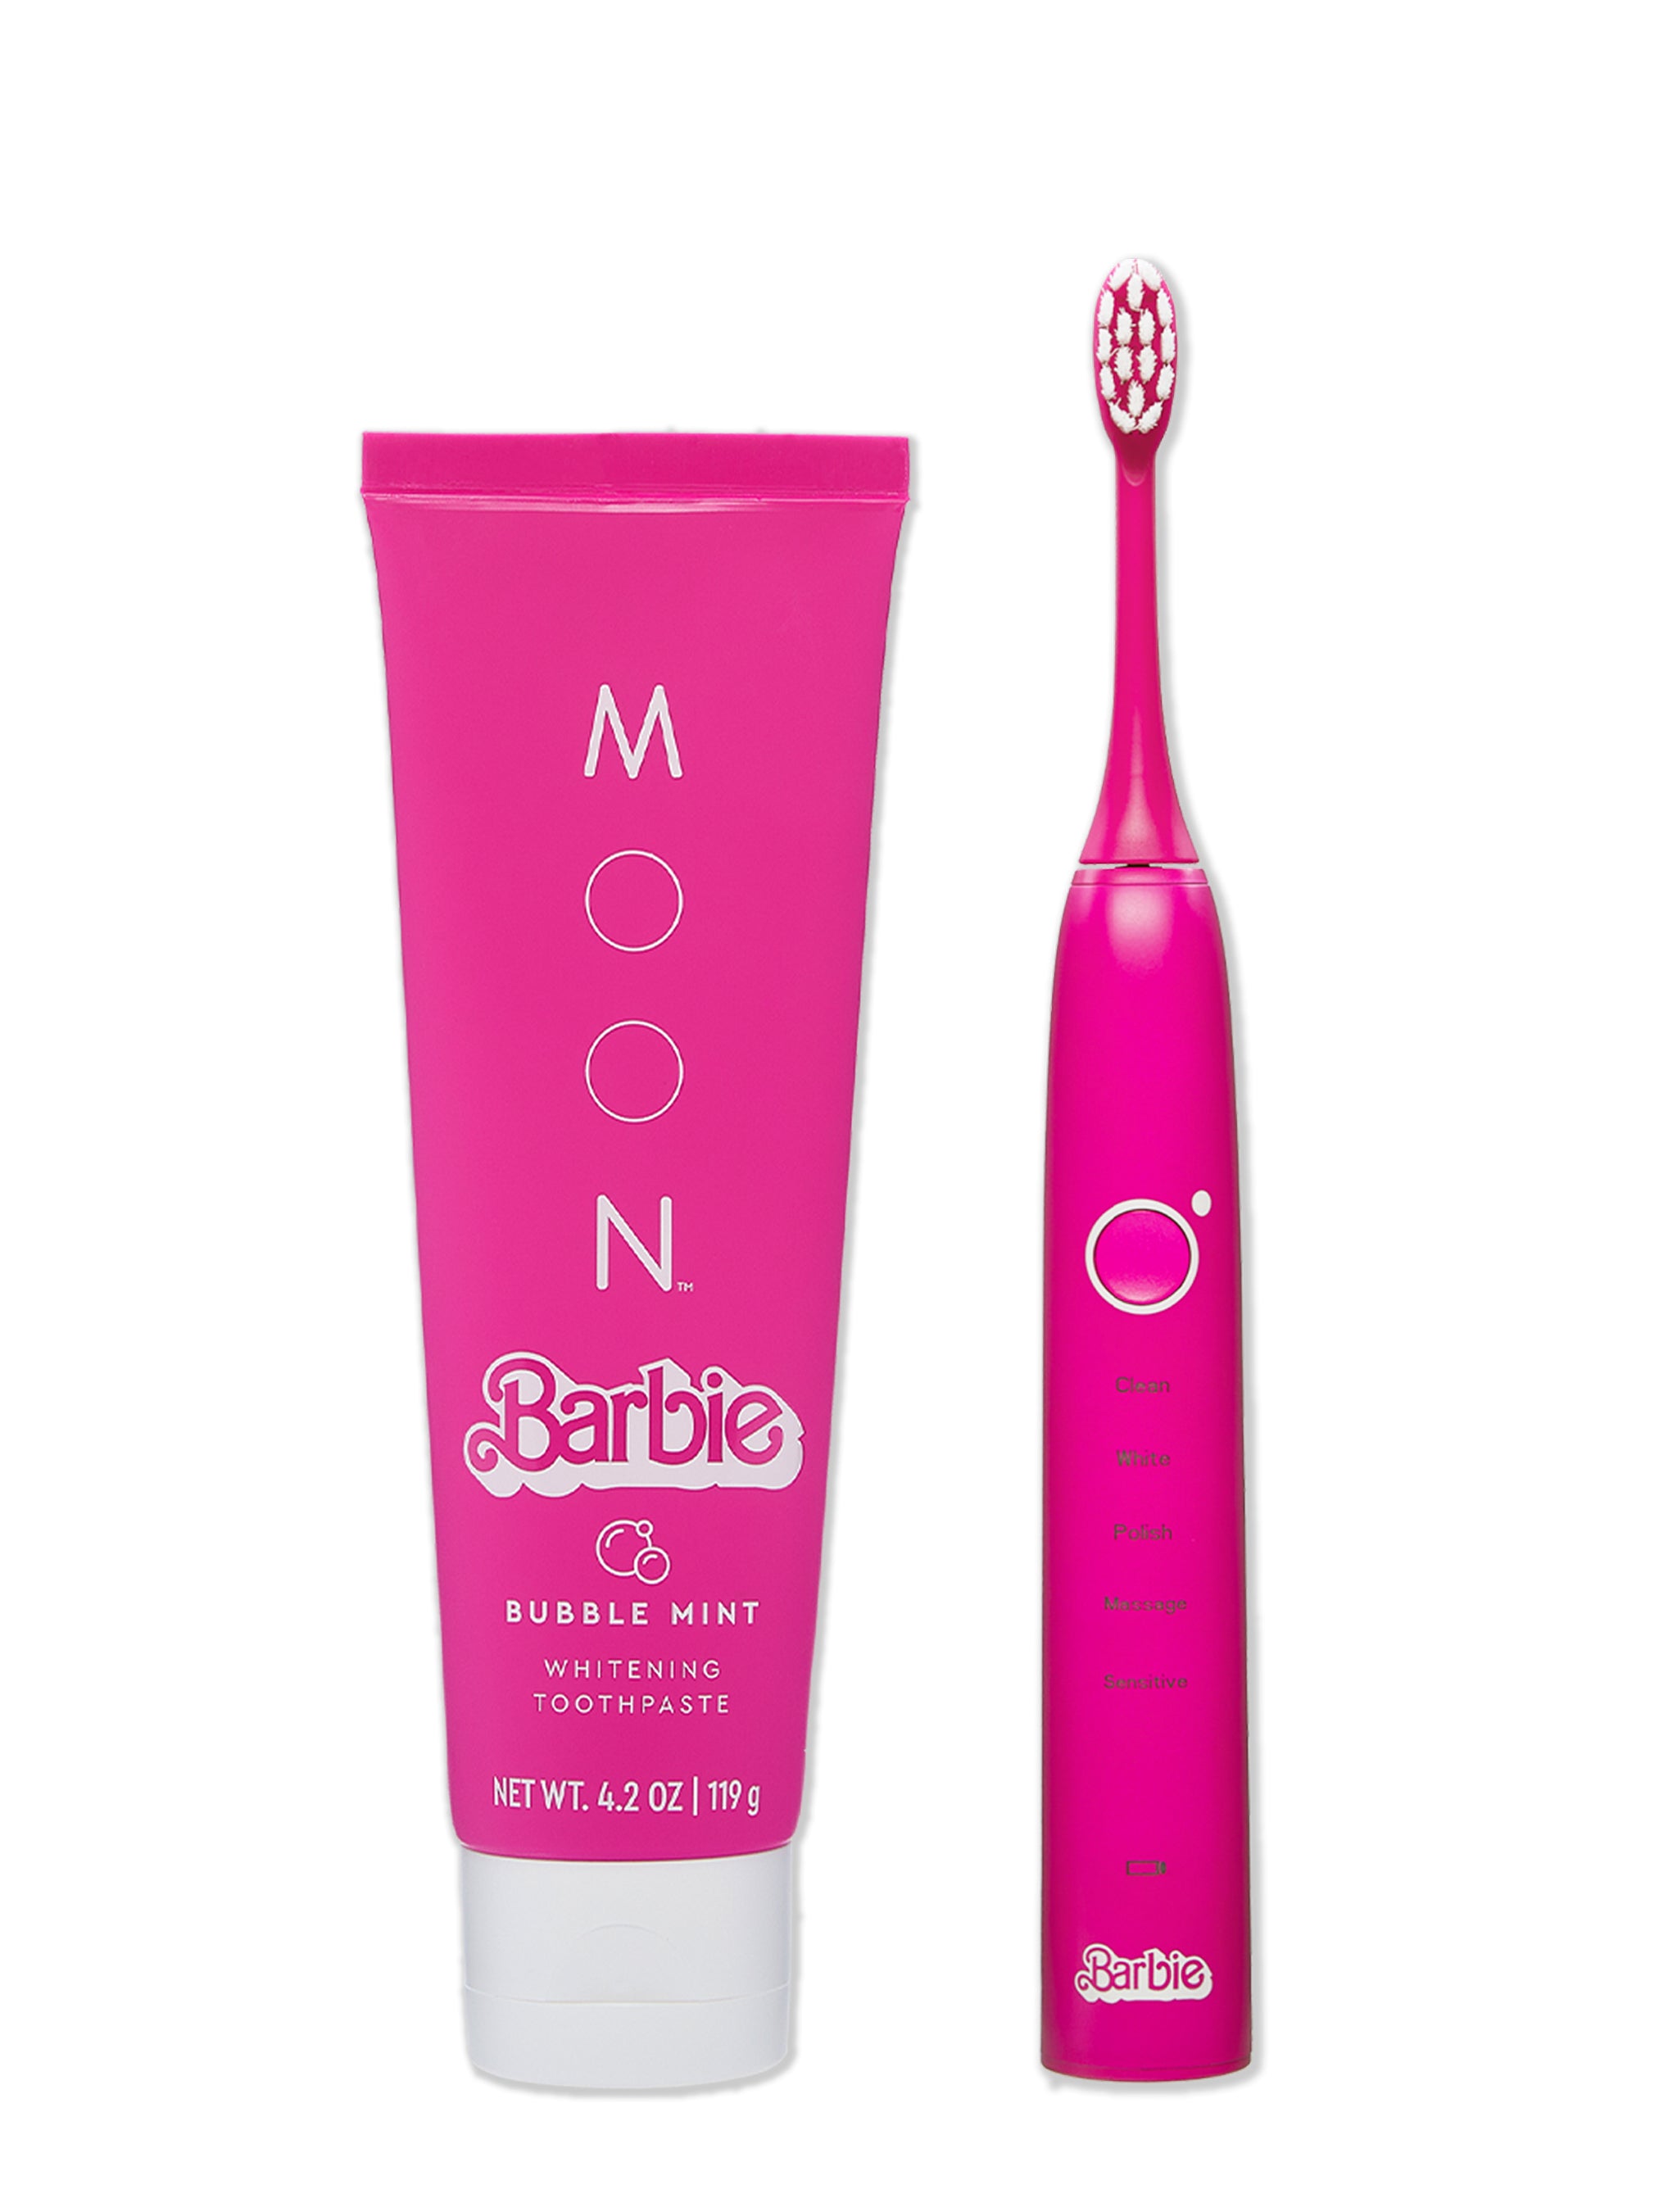 The Electric Toothbrush – Moon Oral Care